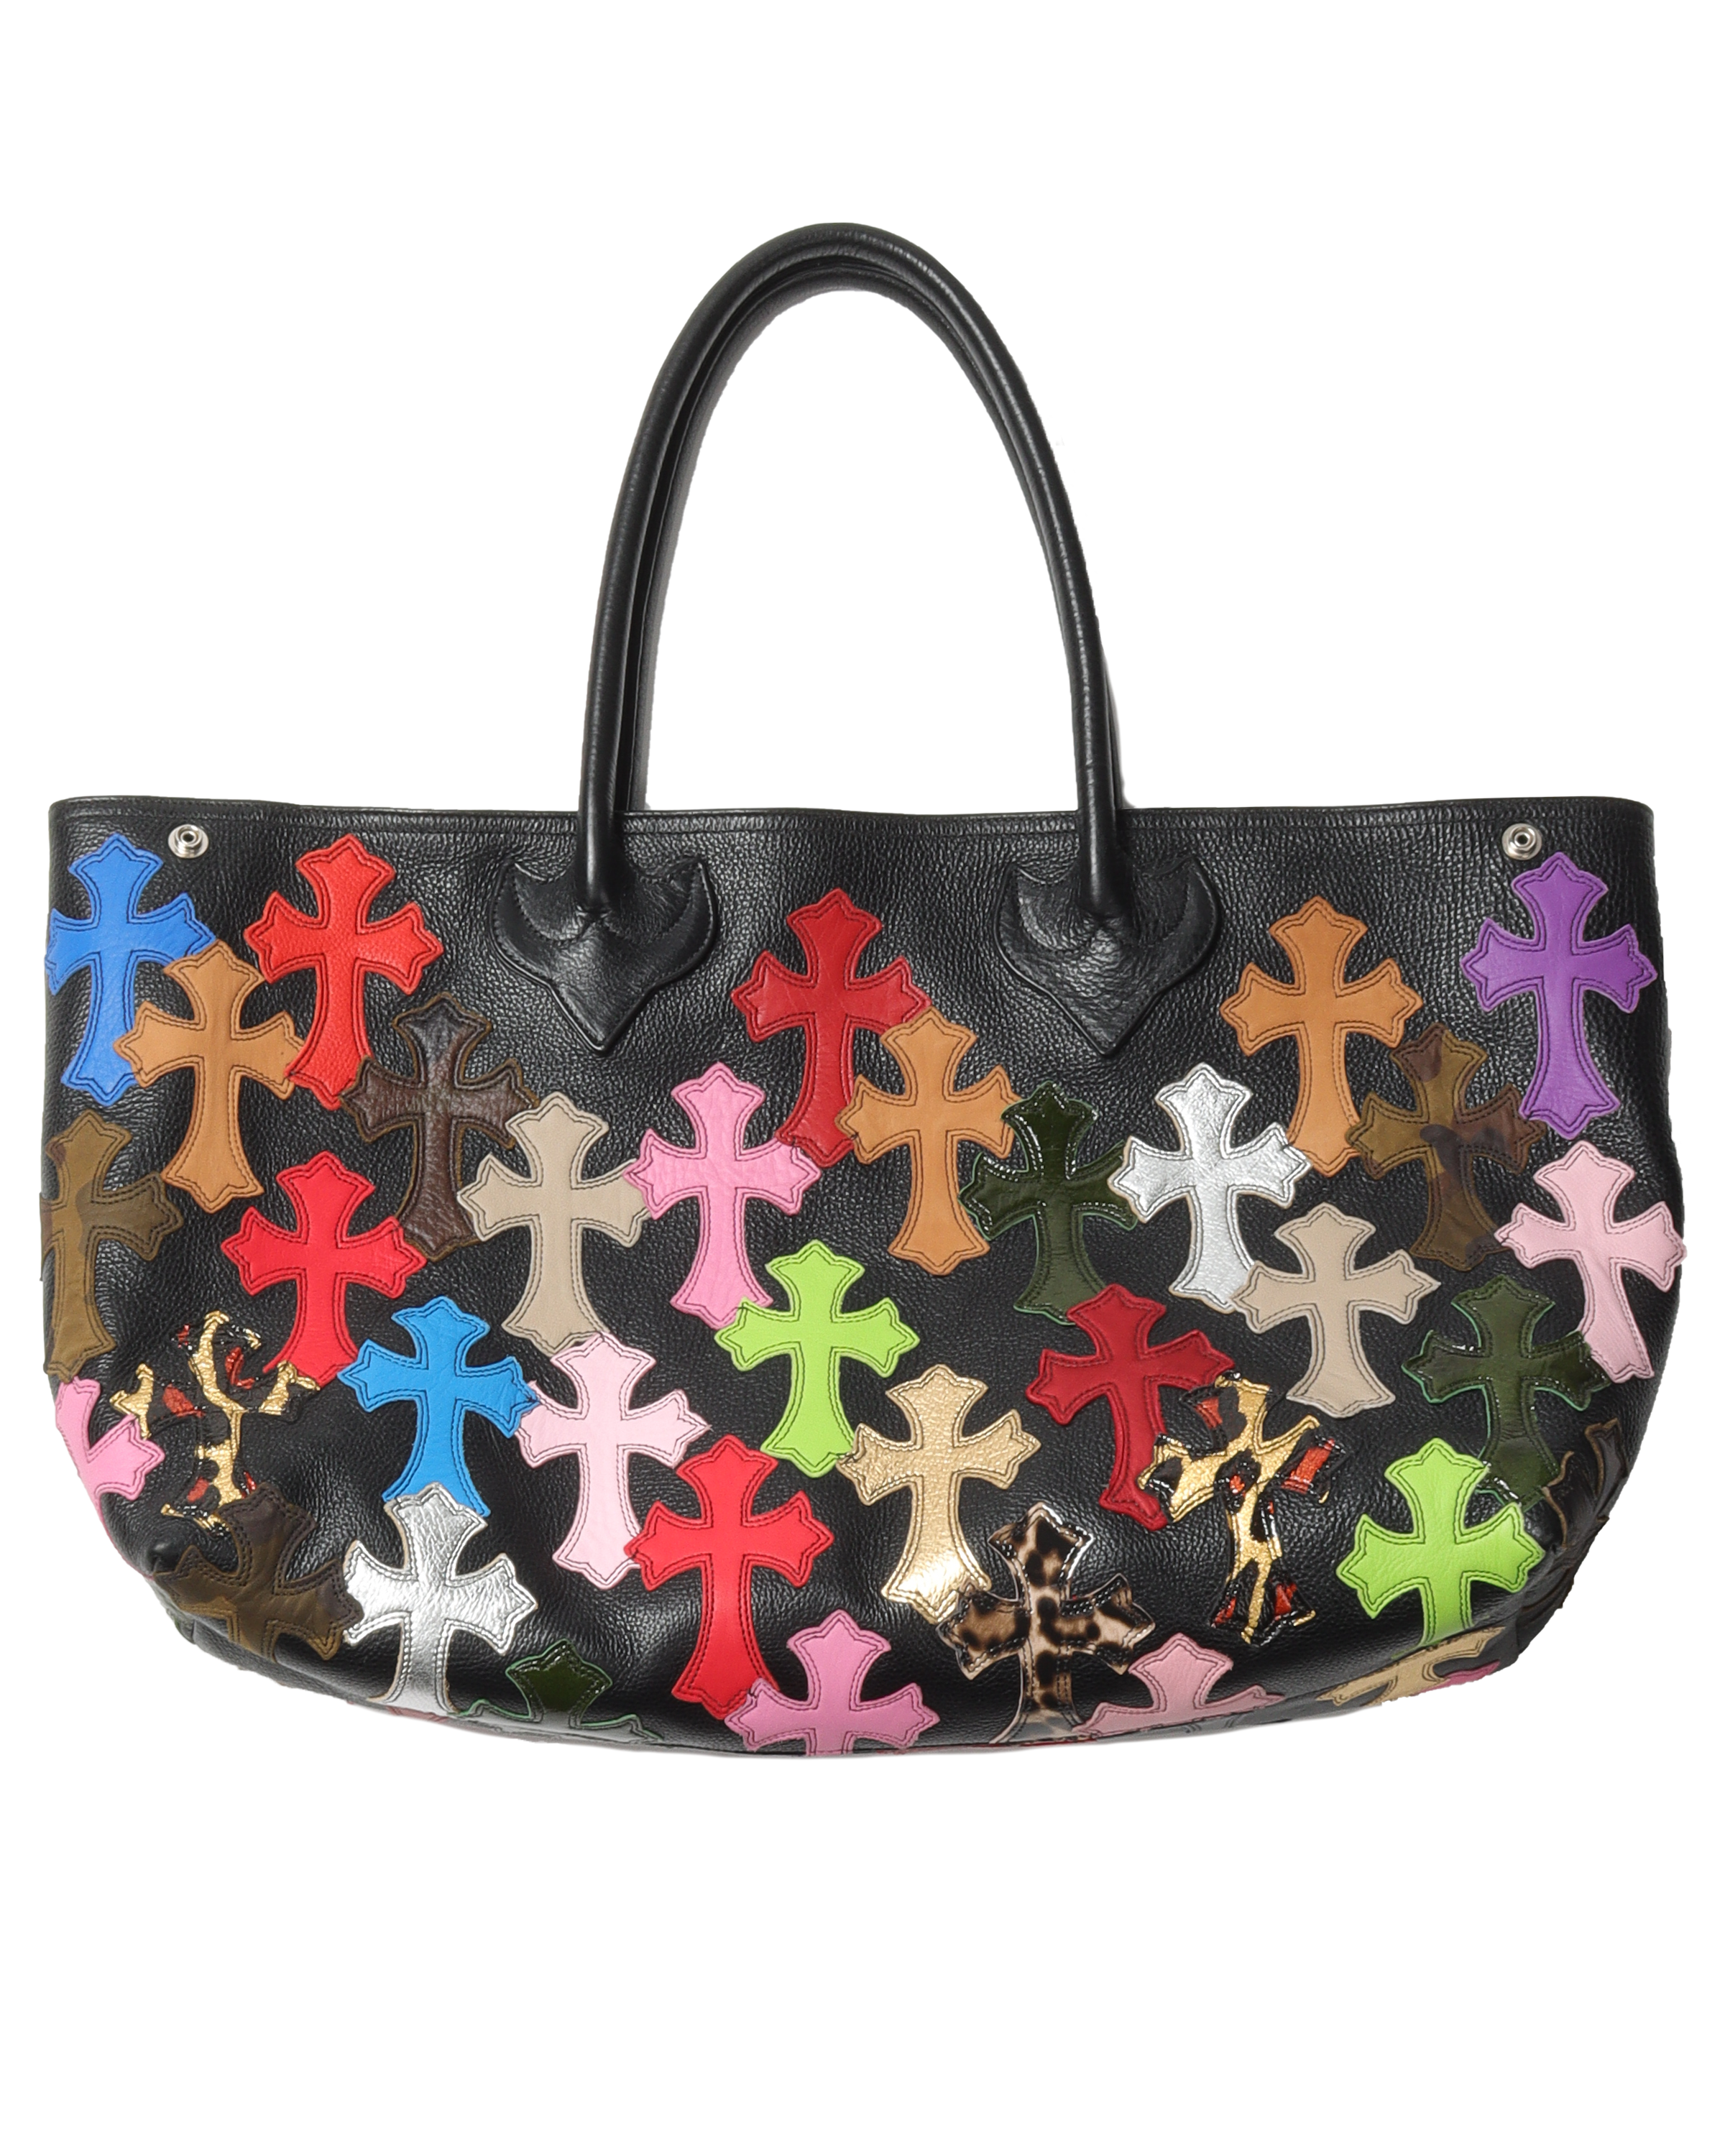 All-Over Cross Patch Leather Bag